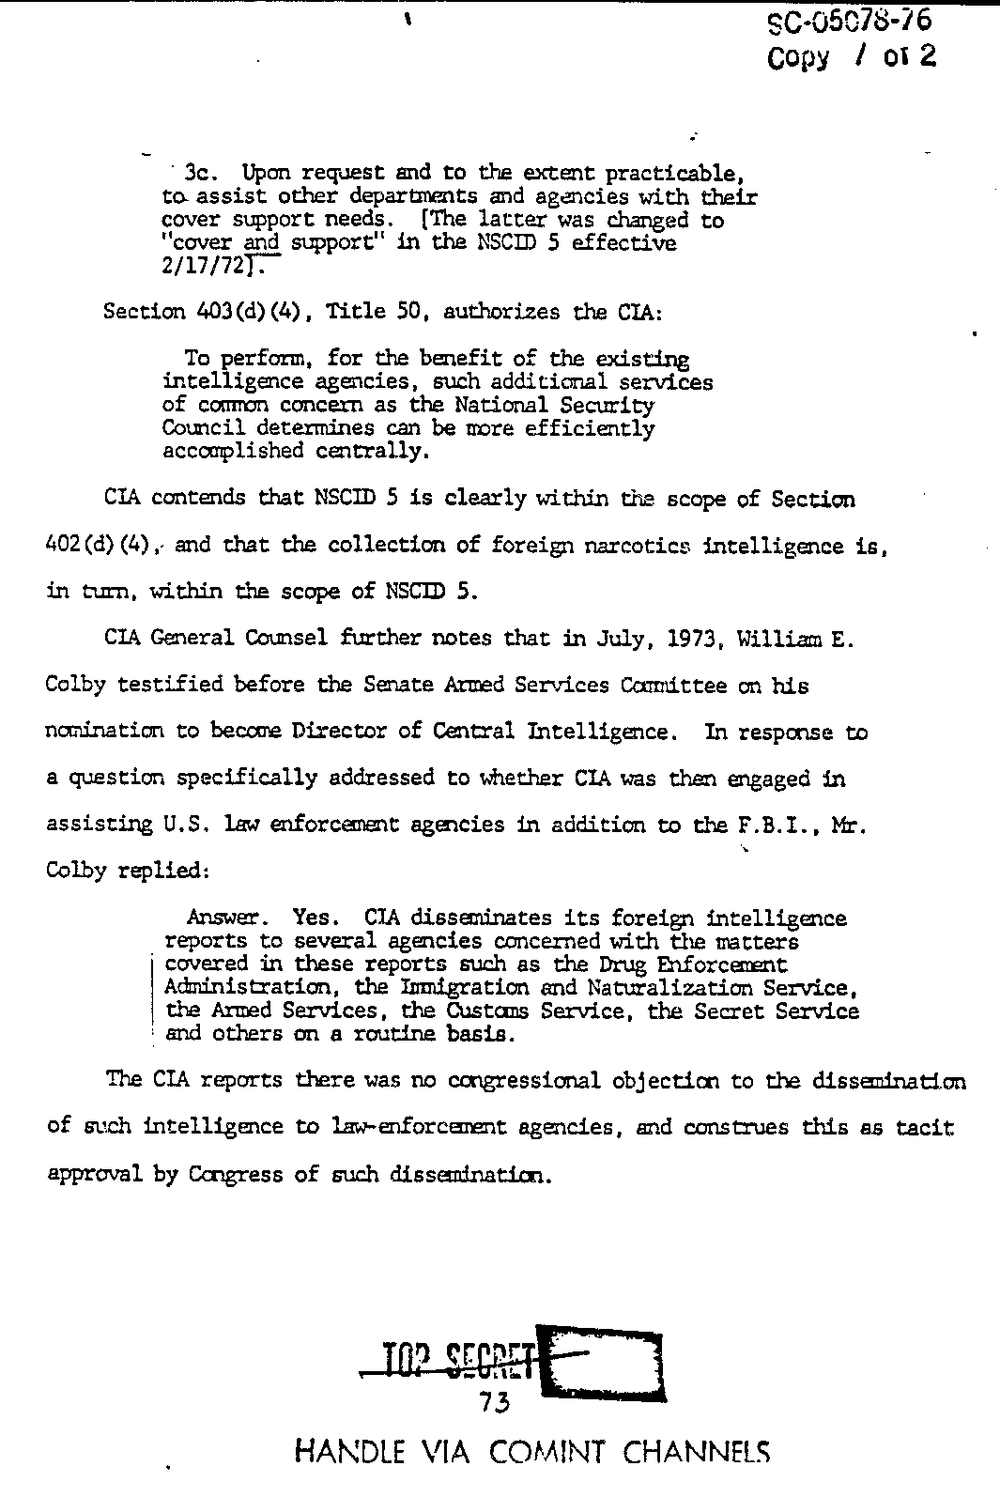 Page 81 from Report on Inquiry Into CIA Related Electronic Surveillance Activities